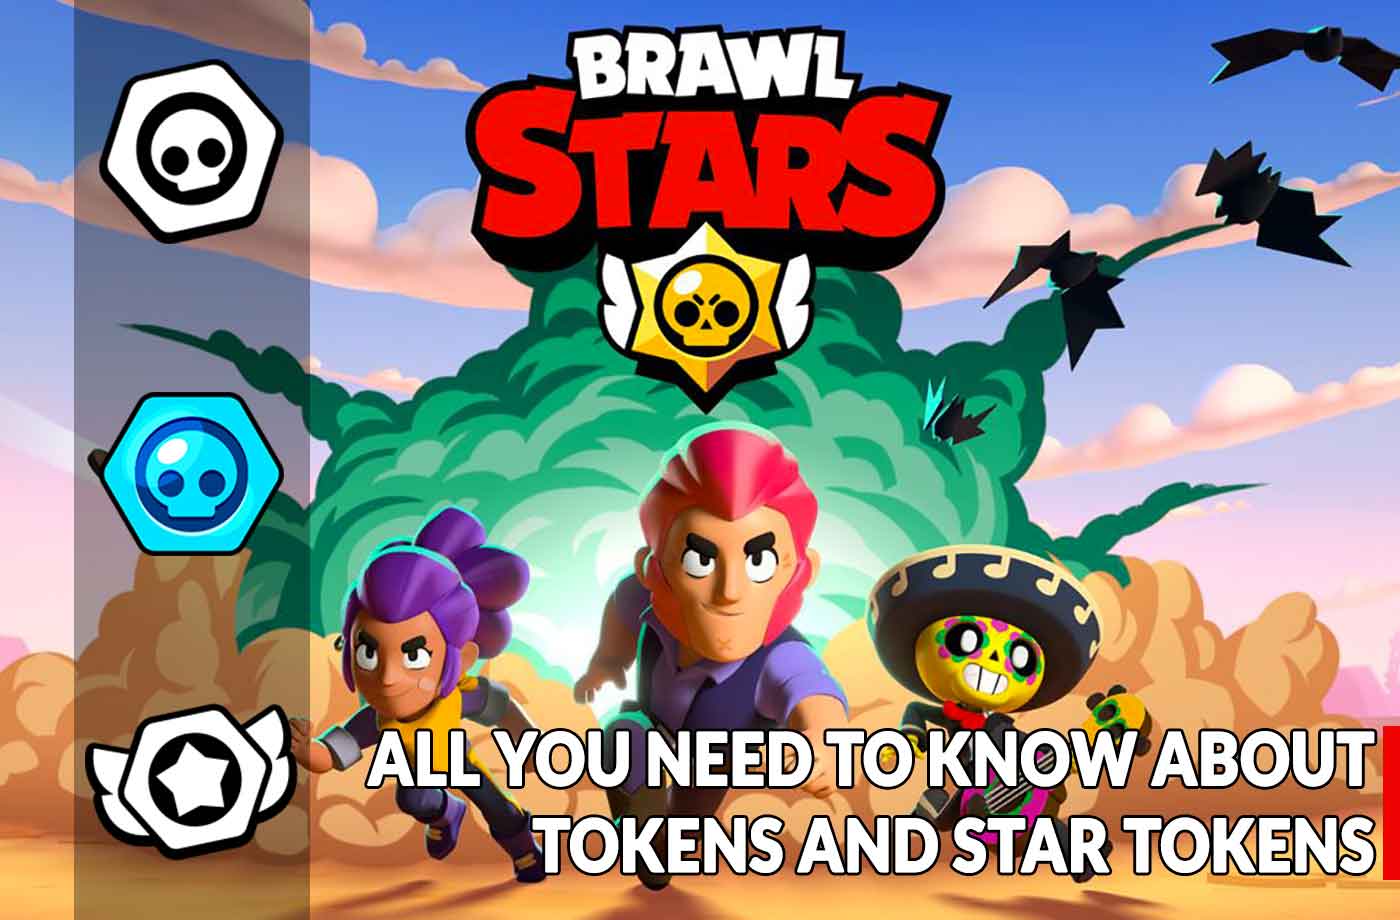 Guide Brawl Stars How To Quickly Gain Tokens And Star Tokens Kill The Game - film de l'homme le plus accro à brawl stars